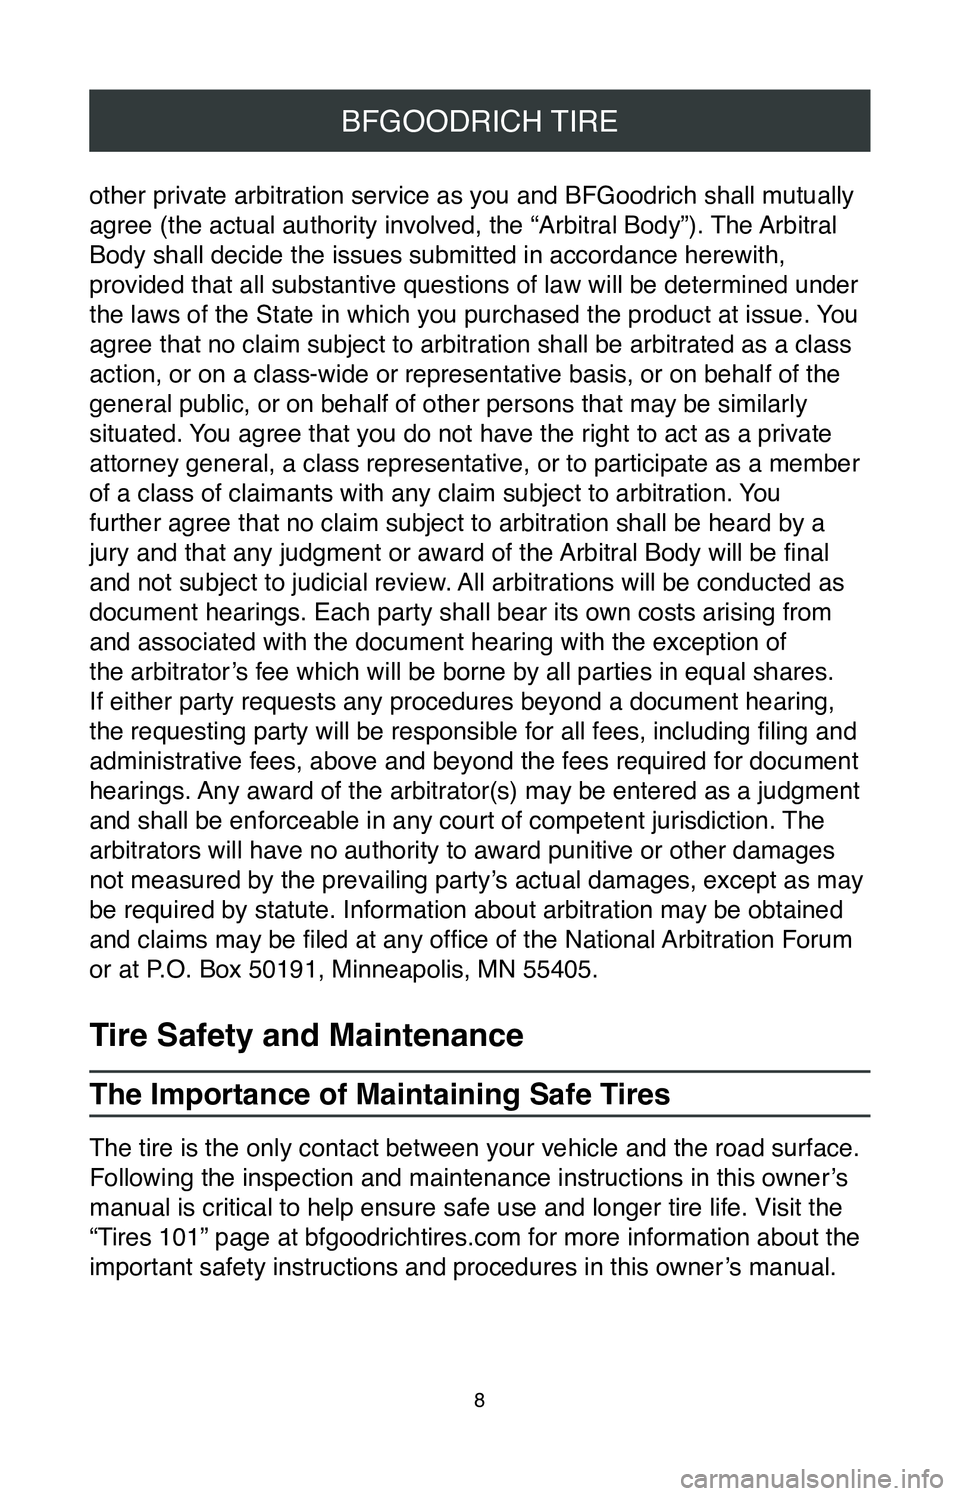 TOYOTA 4RUNNER 2020  Warranties & Maintenance Guides (in English) 8
BFGOODRICH TIRE
other private arbitration service as you and BFGoodrich shall mutually 
agree (the actual authority involved, the “Arbitral Body”). The Arbitral 
Body shall decide the issues sub